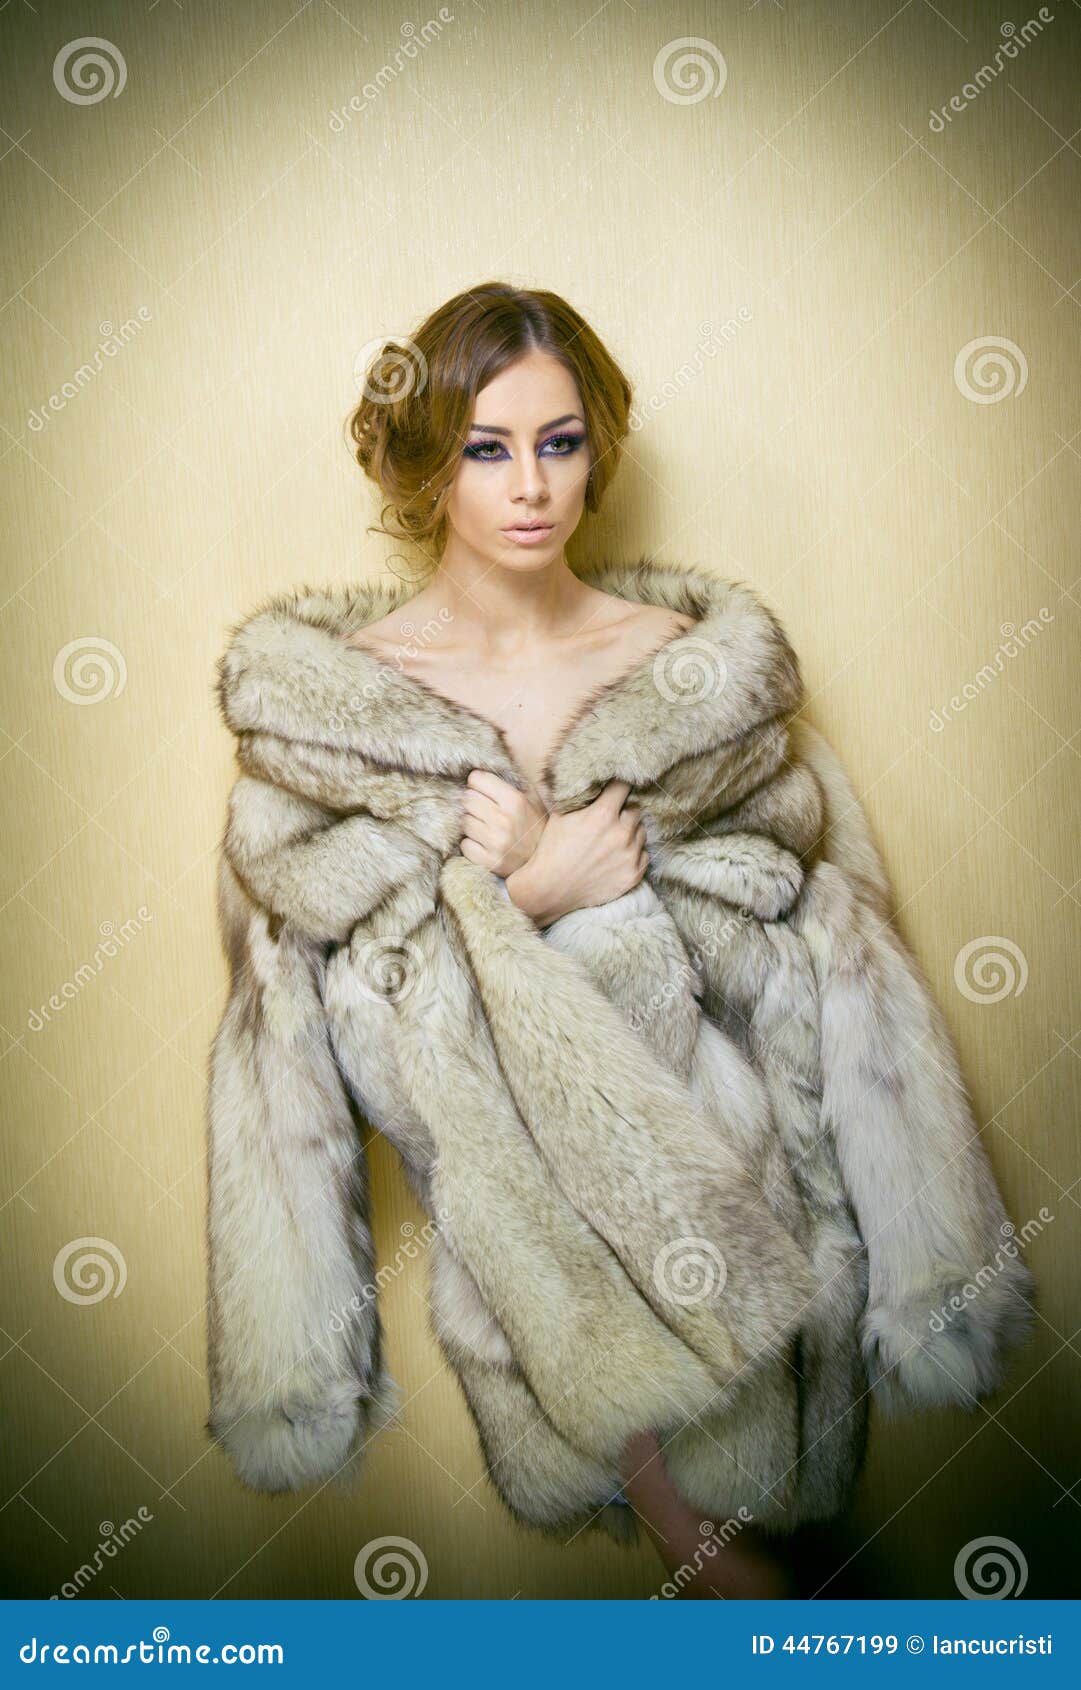 Attractive Young Woman Wearing a Fur Coat Posing Provocatively Indoor ...